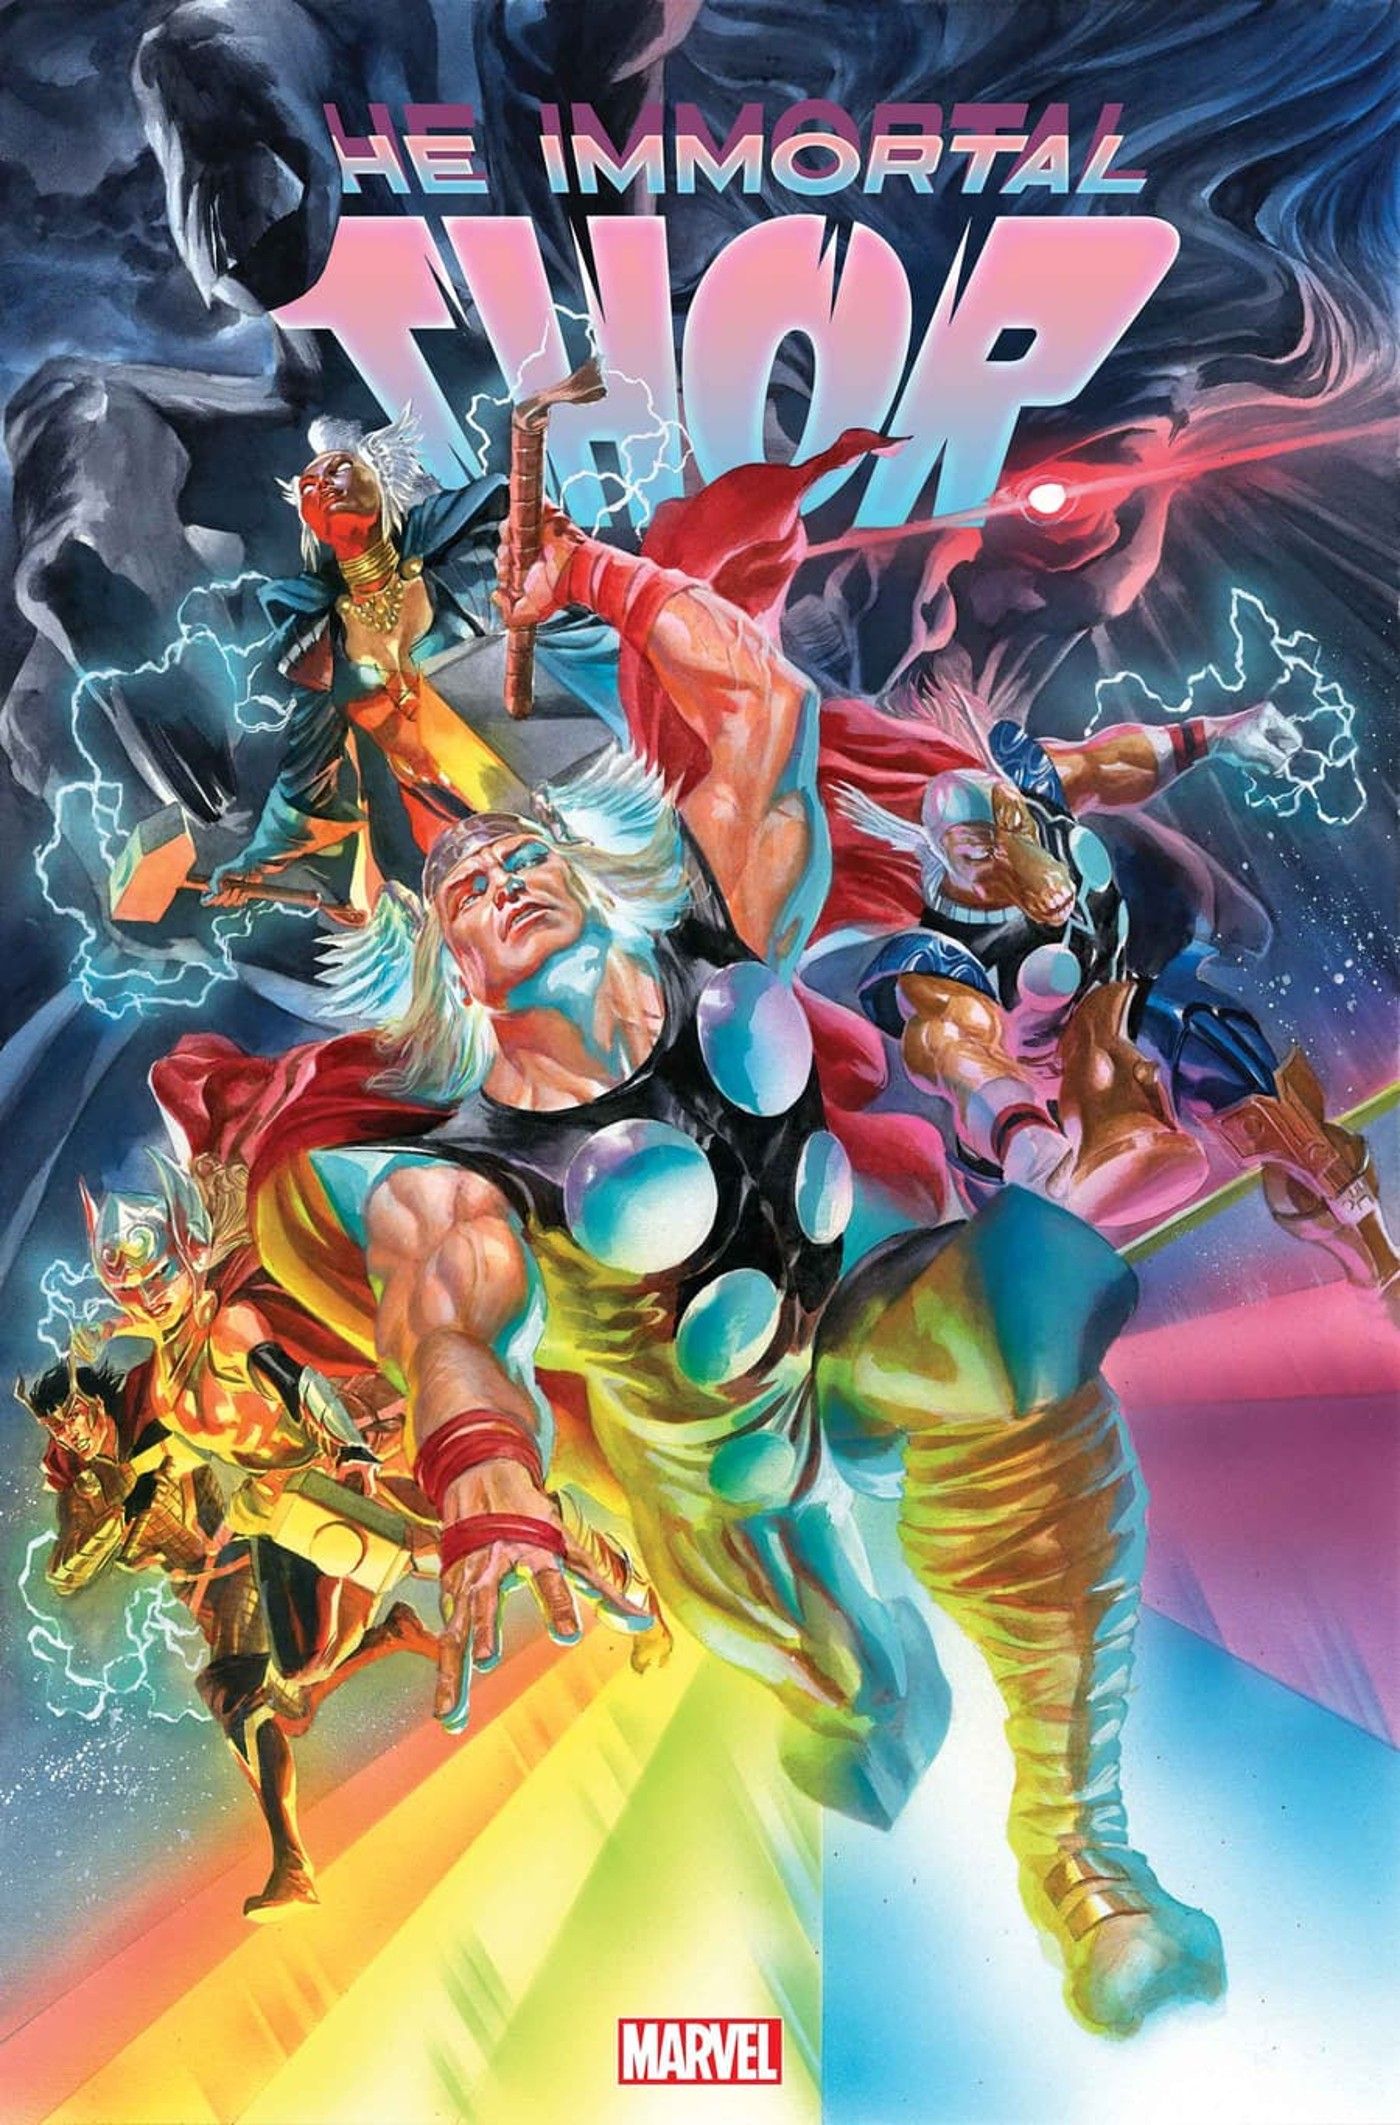 Immortal Thor #5 Main Cover by Alex Ross, featuring the all new Thor Corps with Storm, Loki, Jane Foster, and Beta Ray Bill